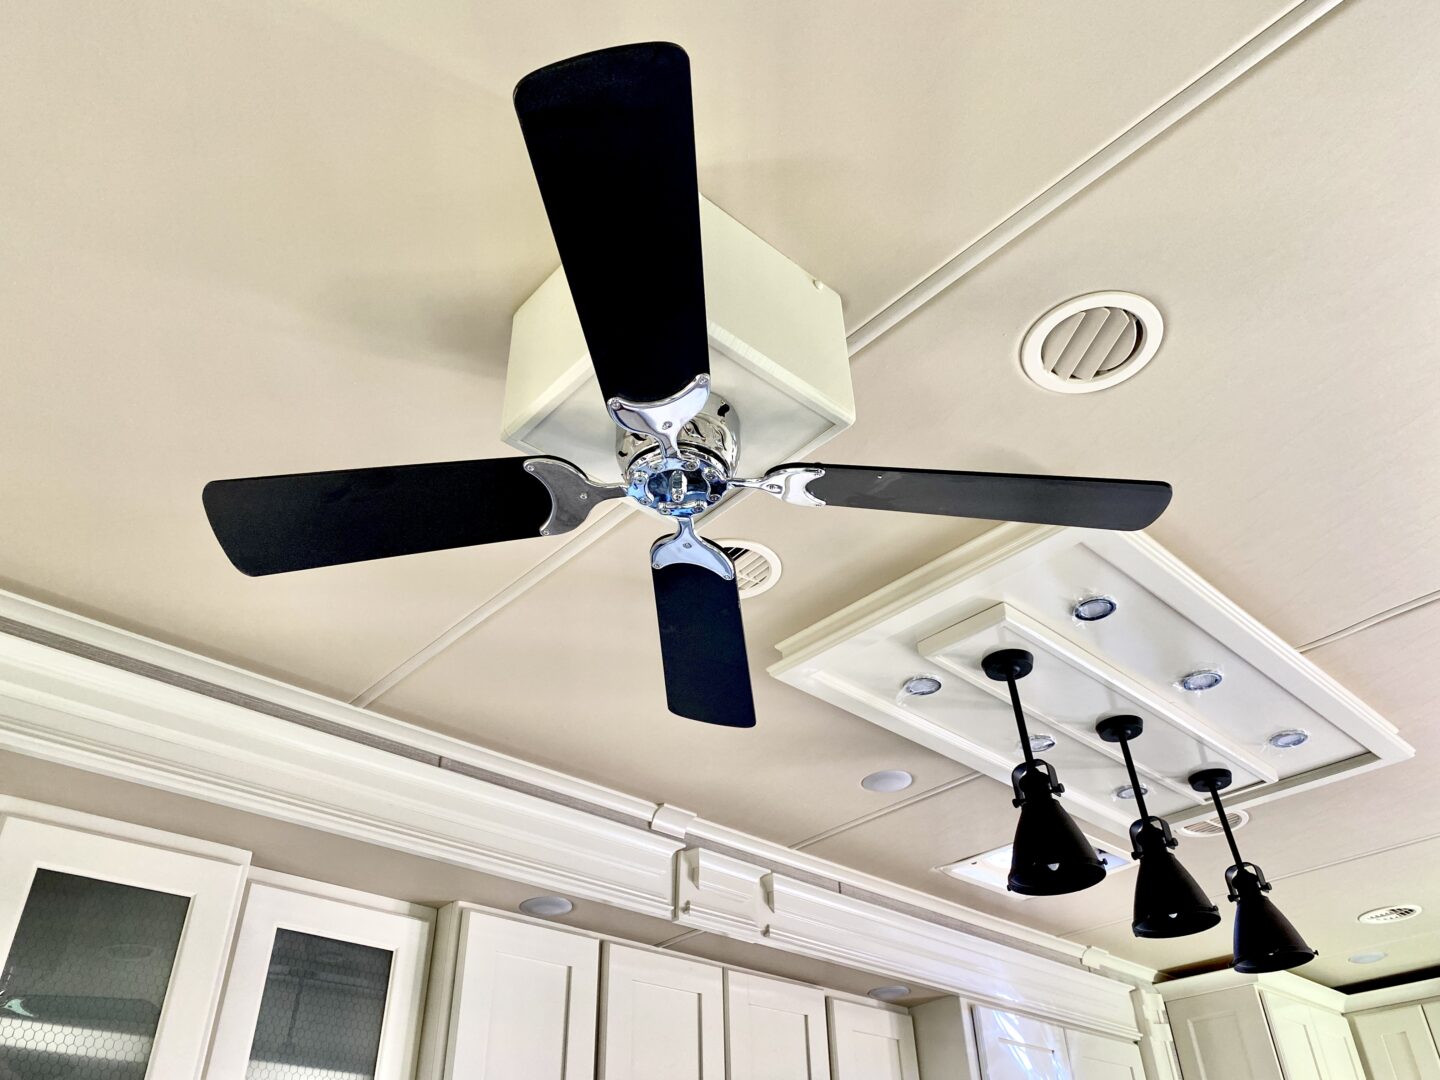 Can You Put a Ceiling Fan in an RV?